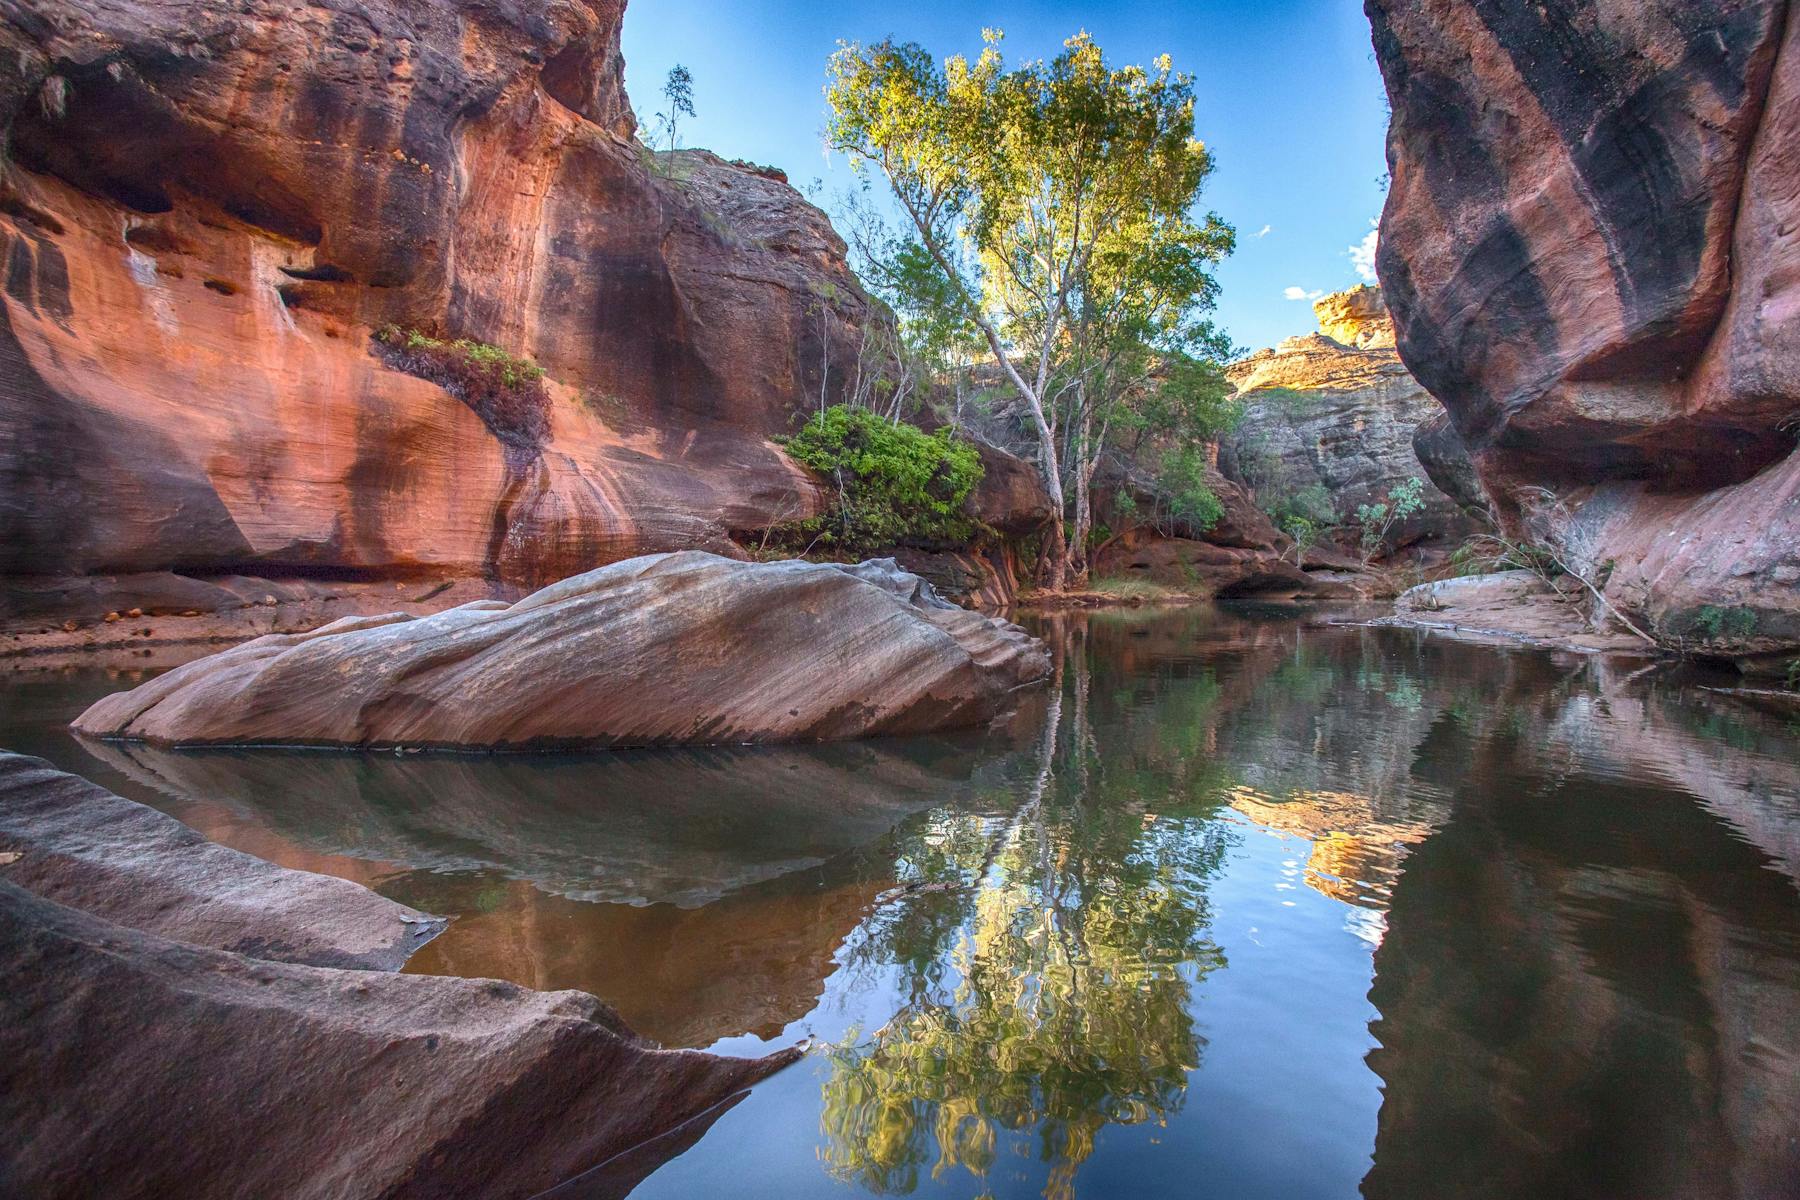 Stunning reflections on Cobbold Gorge